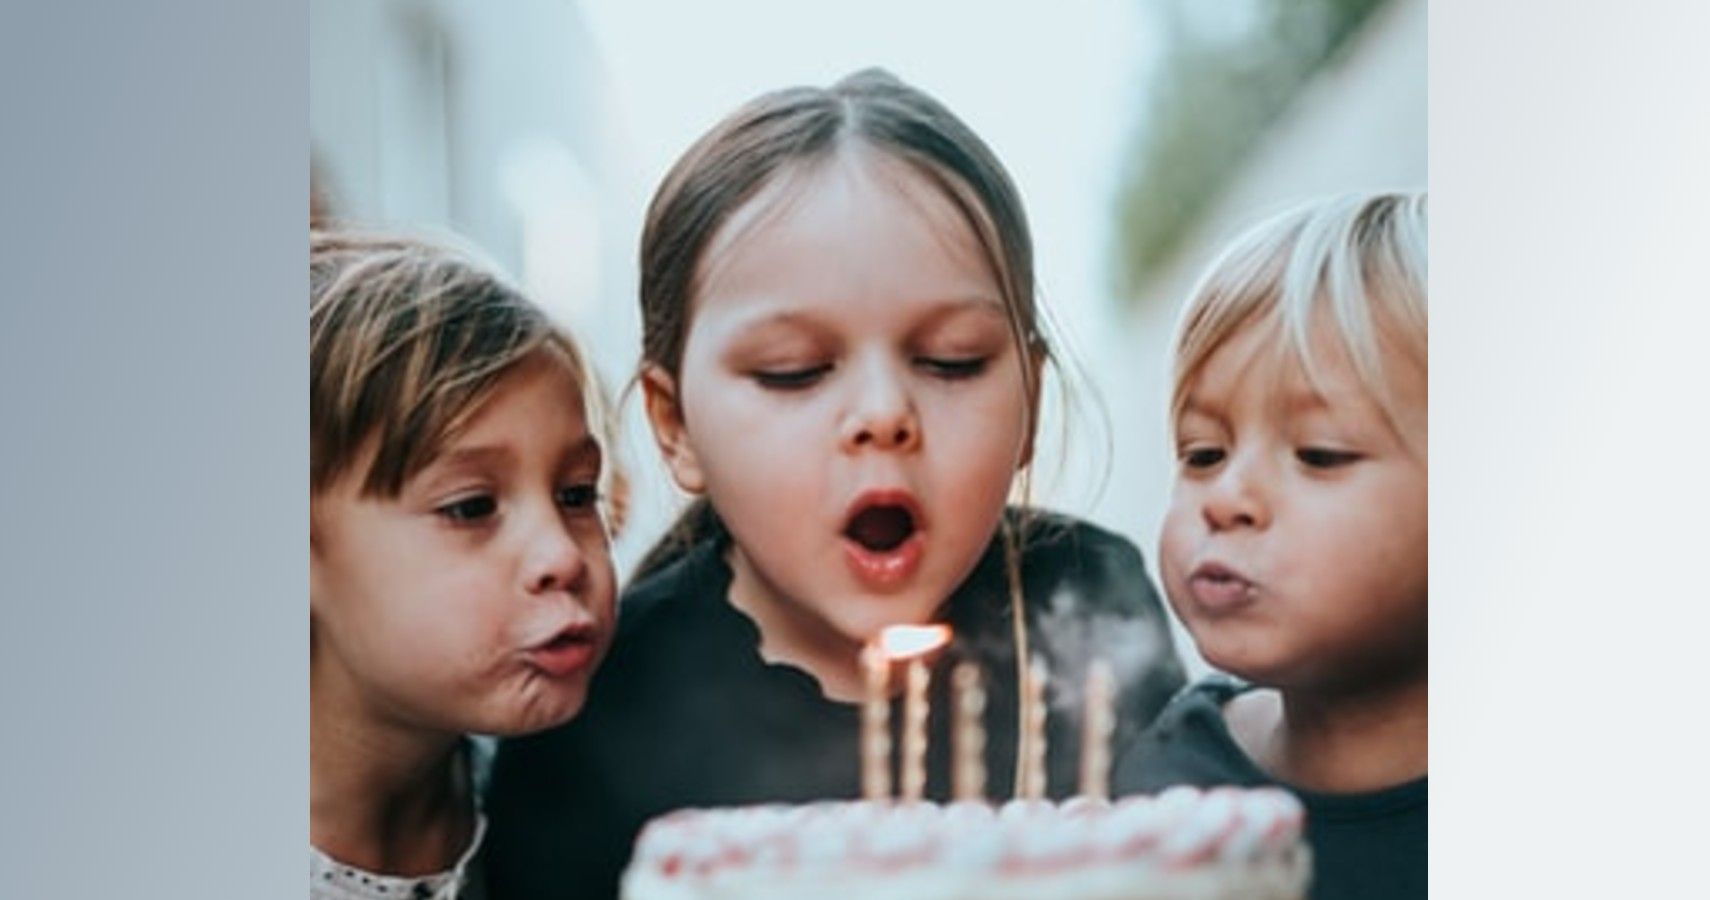 Children blowing out candles on birthday cake